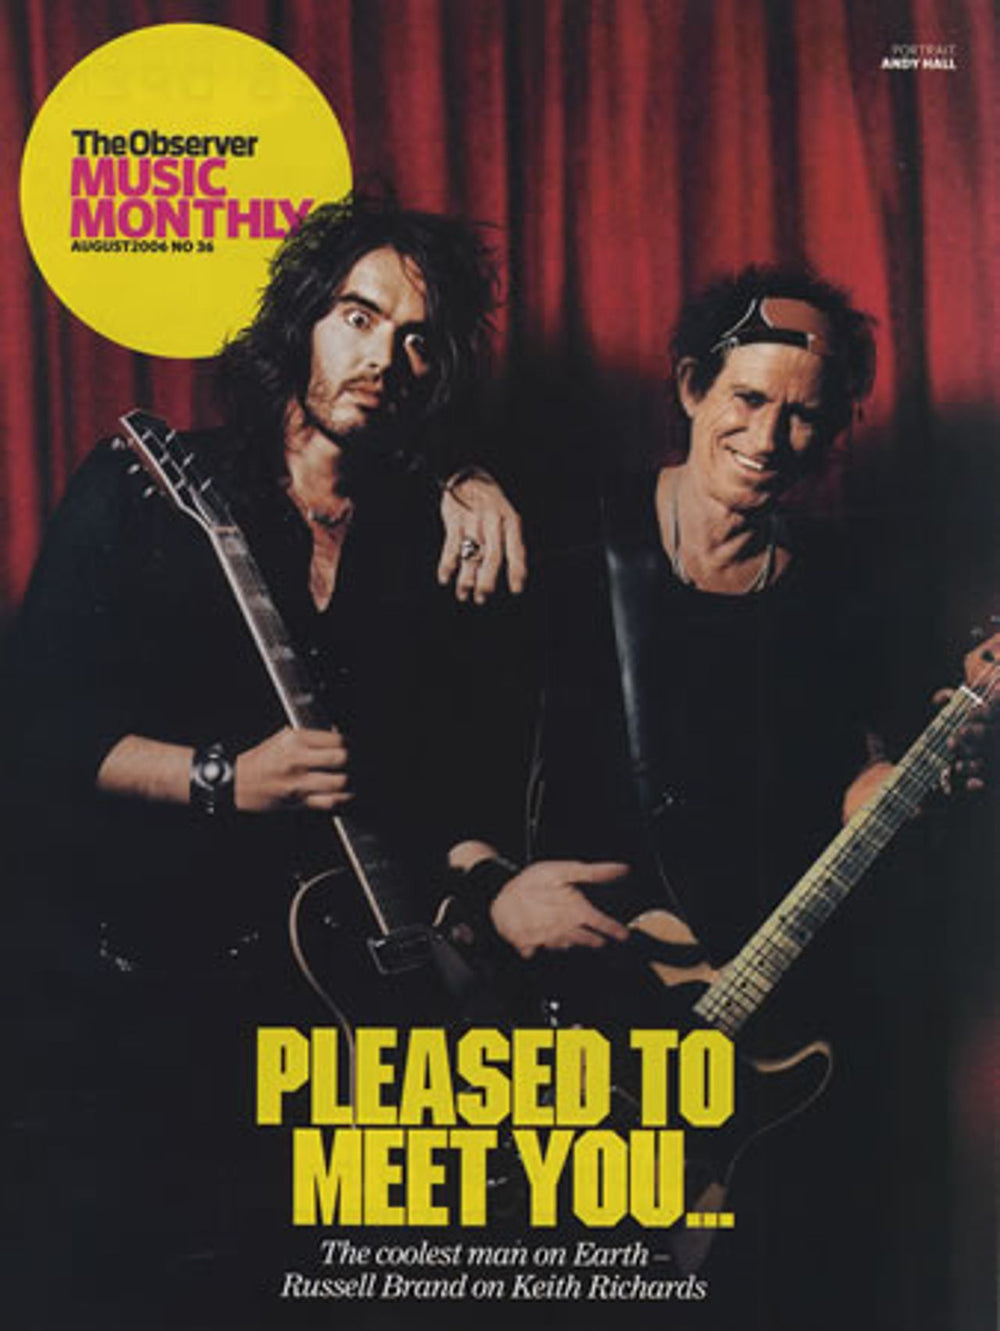 The Rolling Stones Observer Music Monthly UK magazine